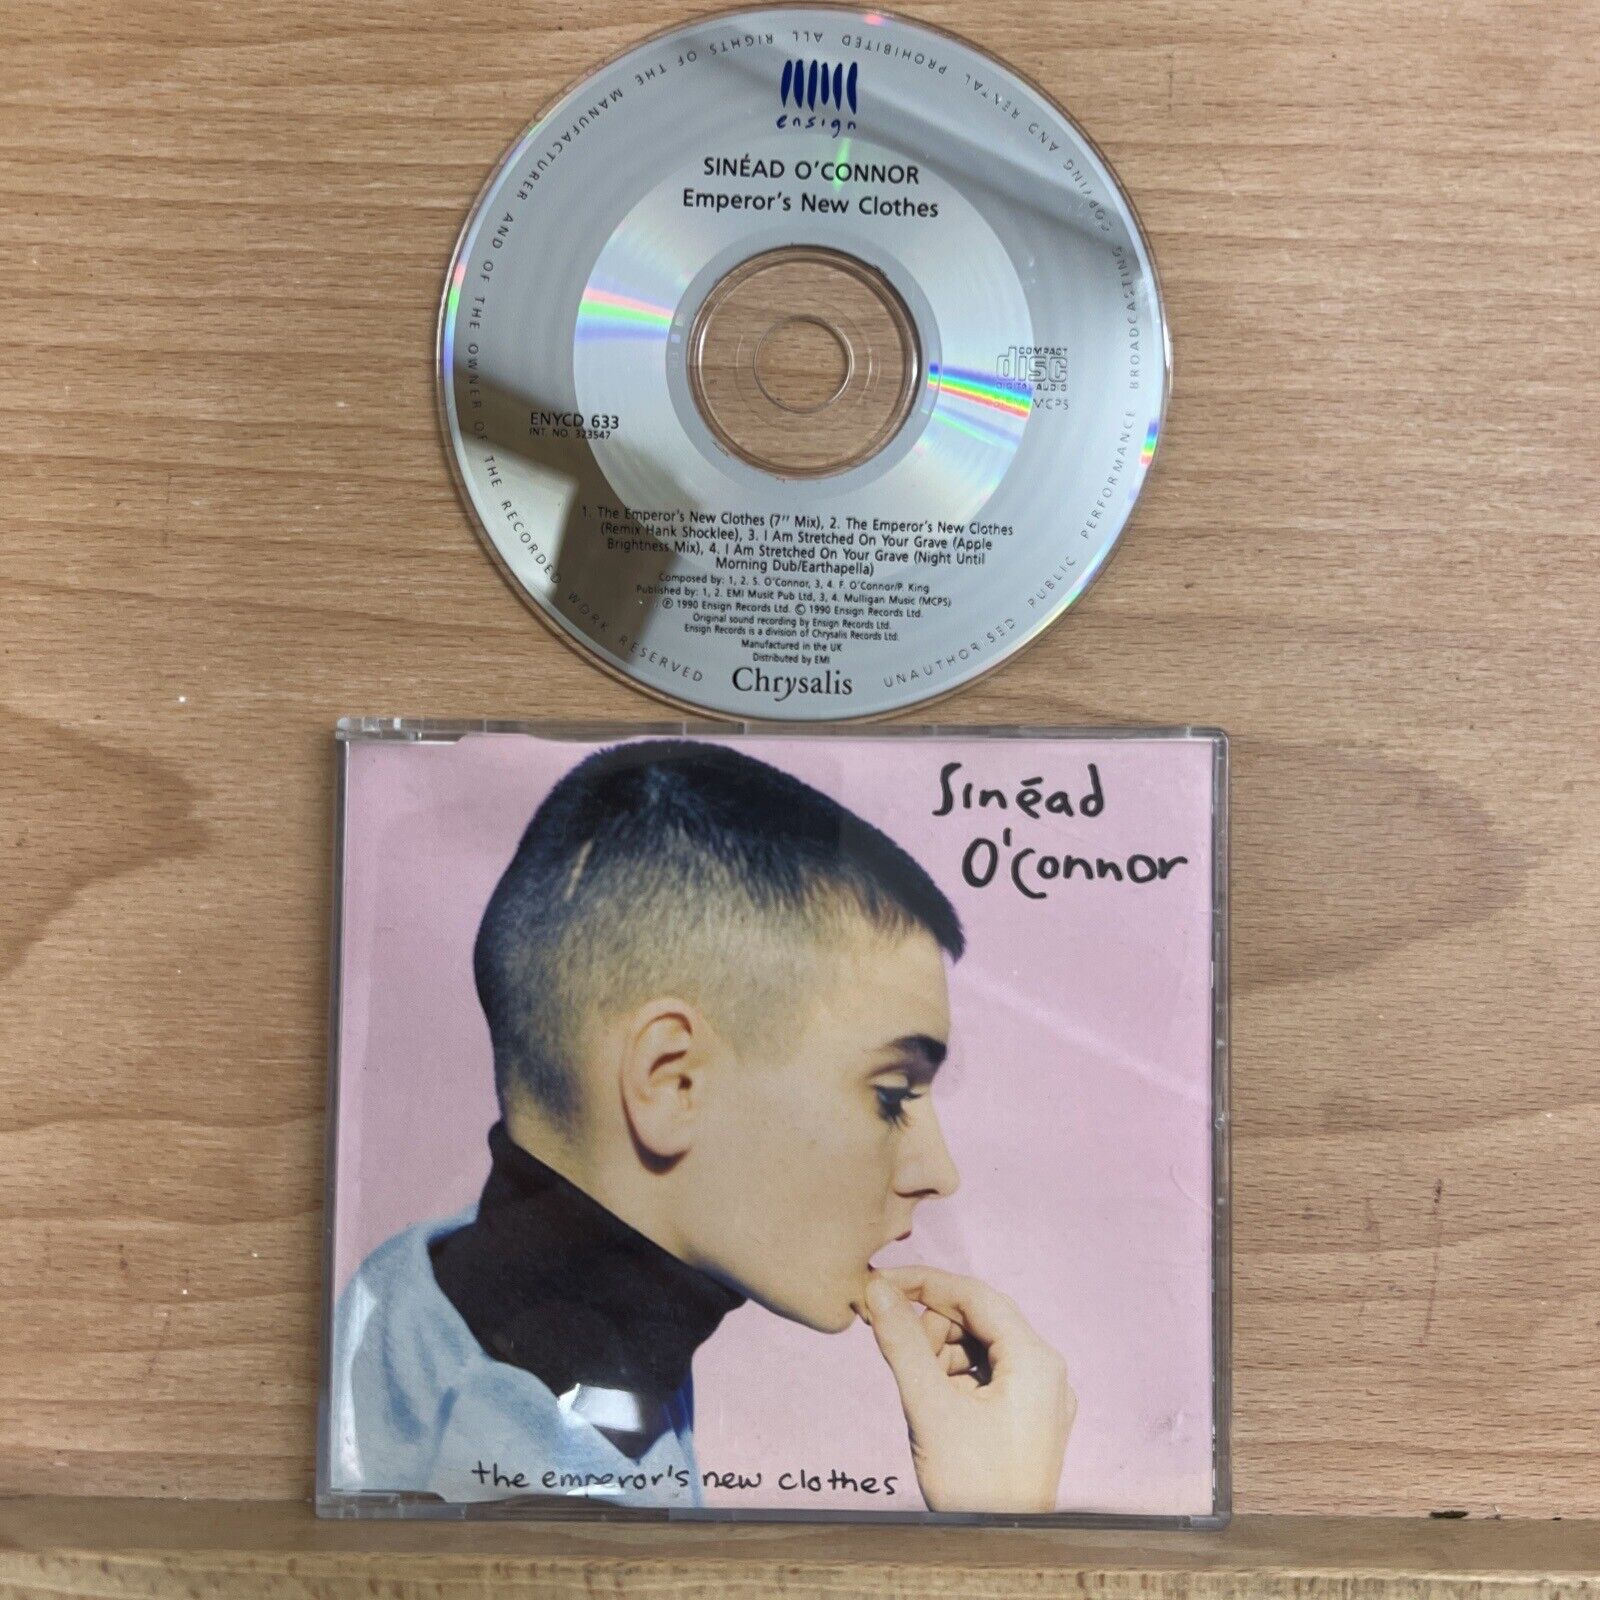 Sinead O’Connor - Emperor's new clothes (CD, 1990) 4 TRK